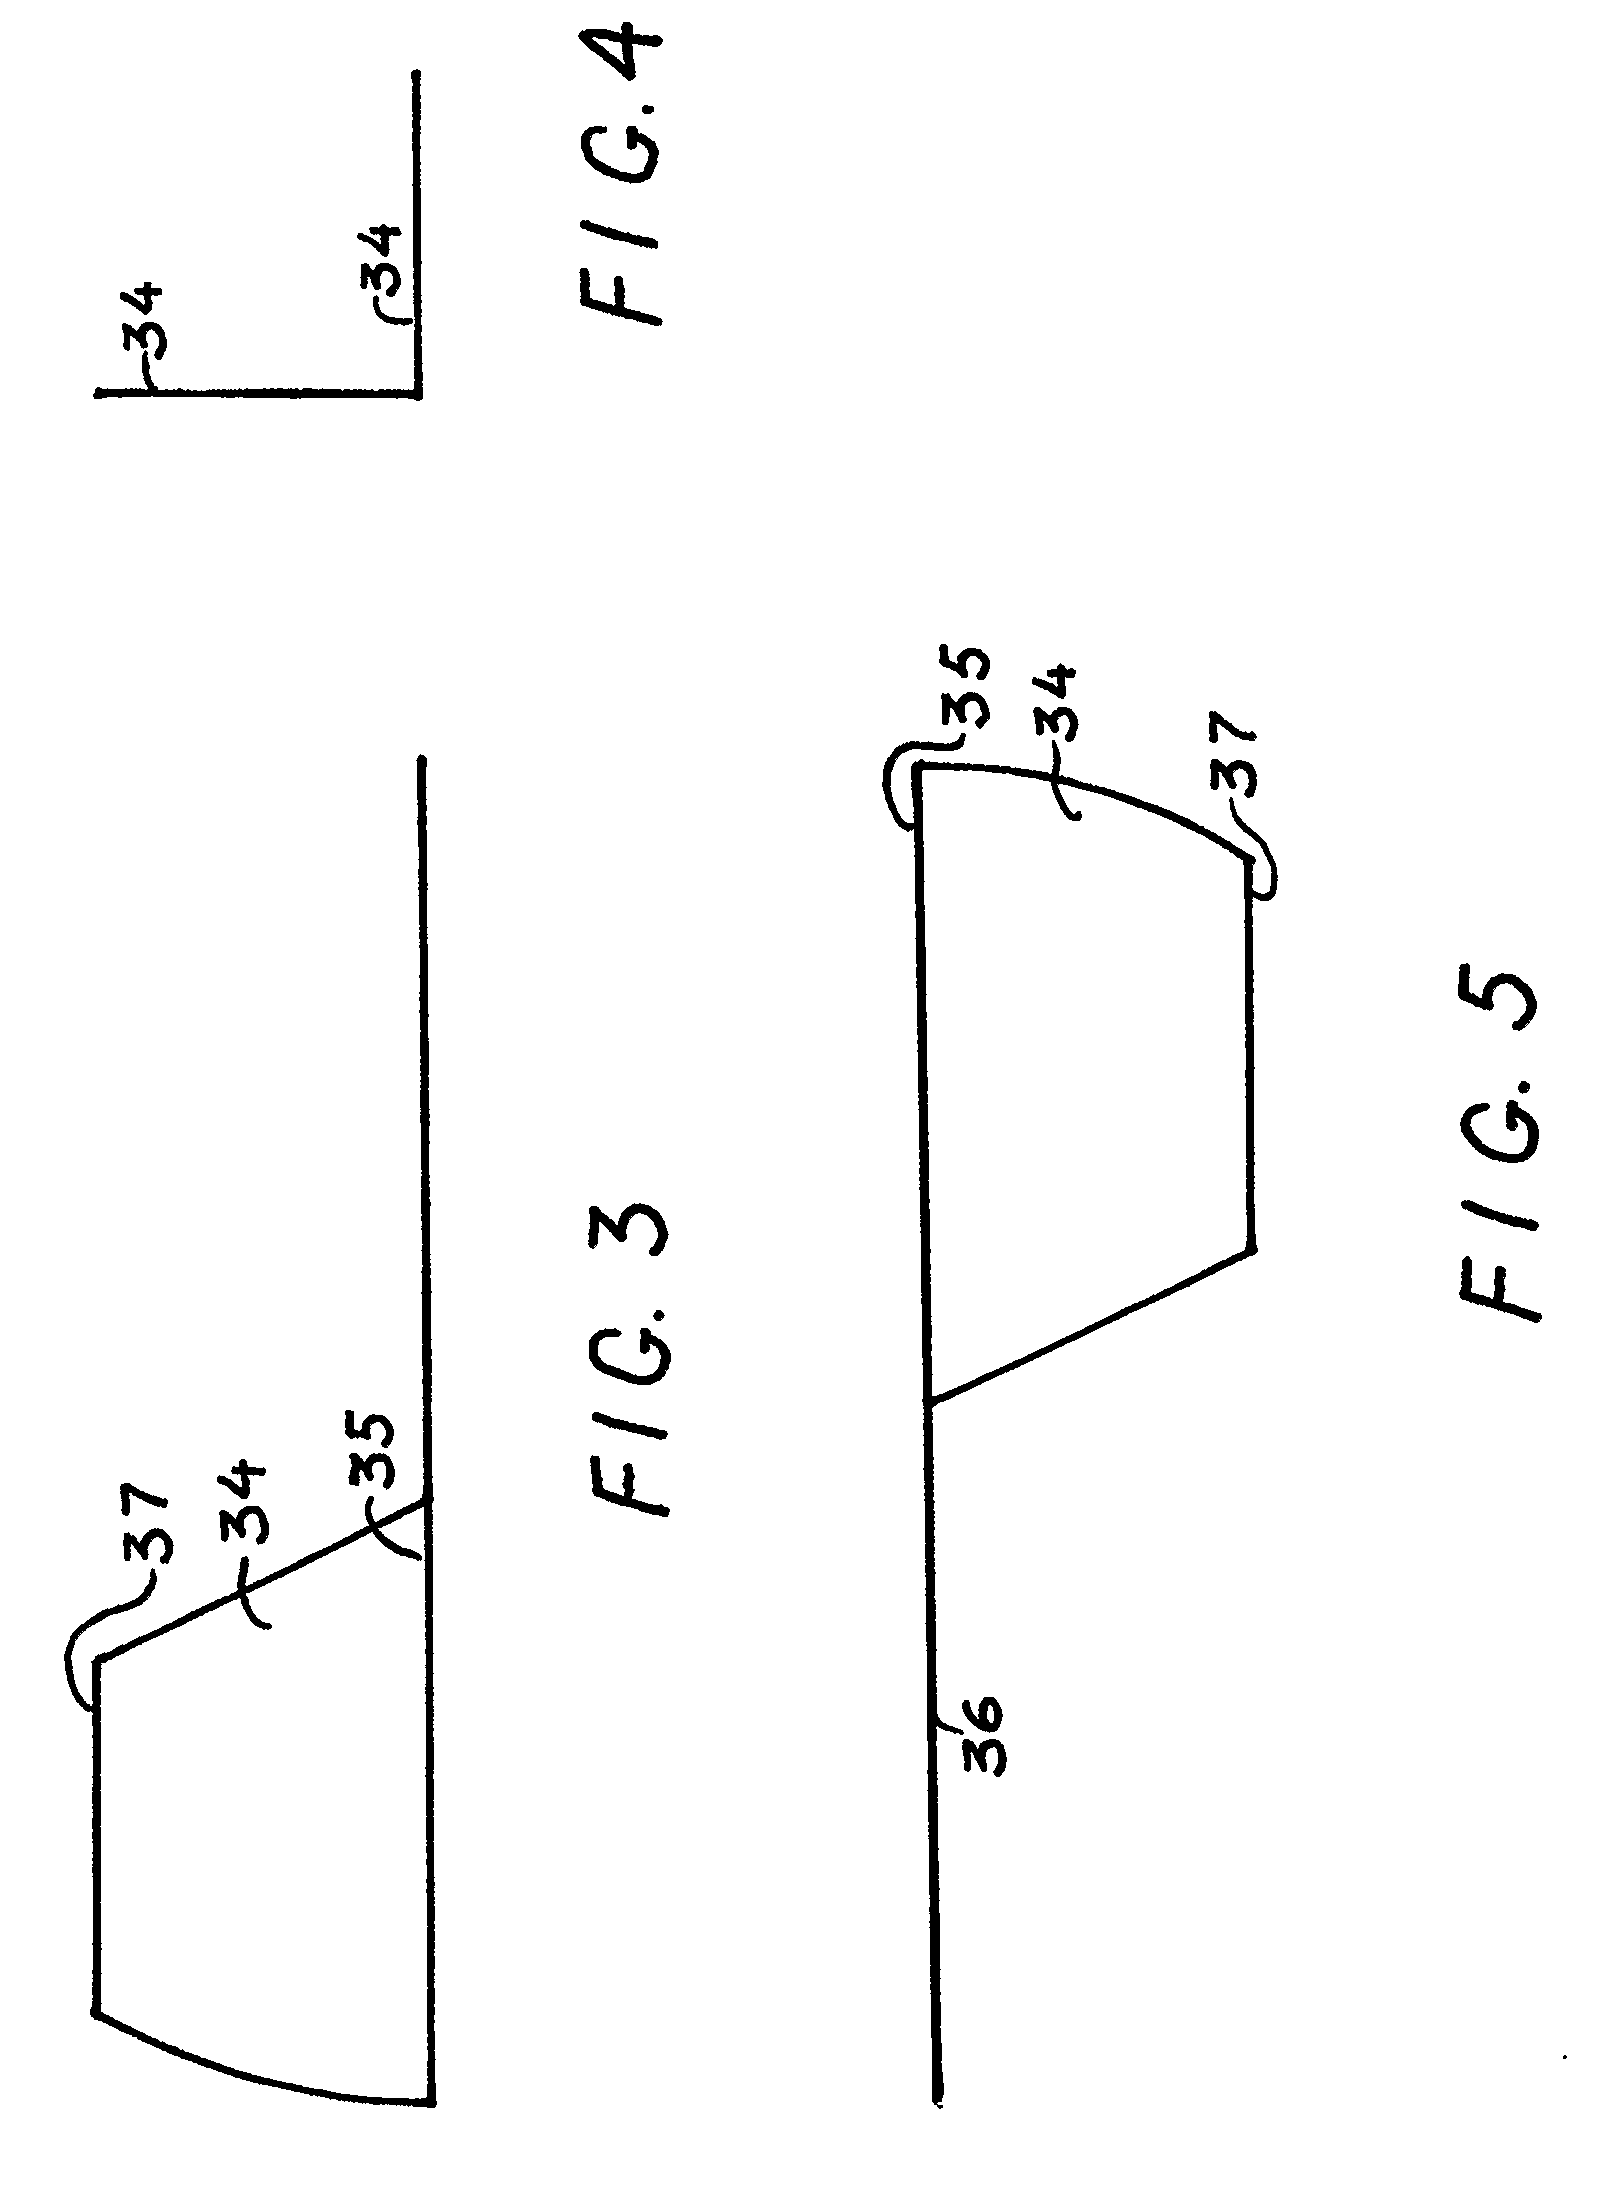 Modular system for generating electricity from moving fluid